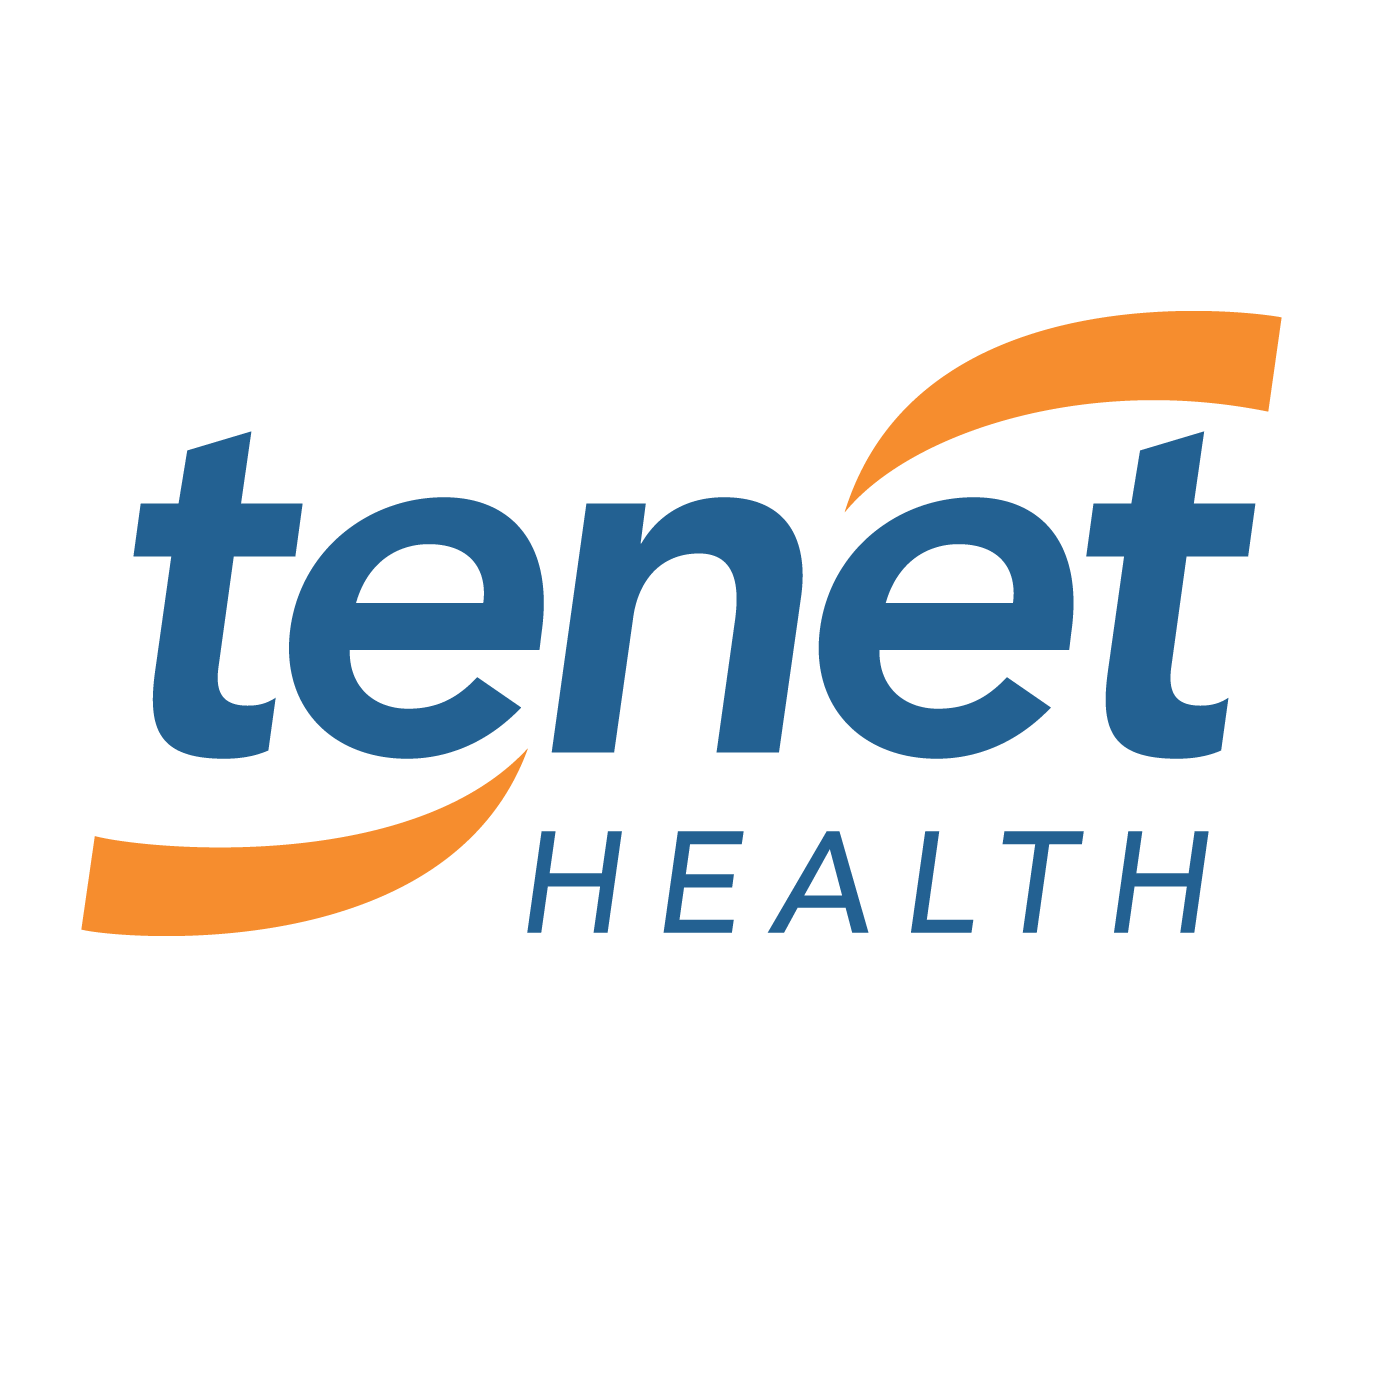 Welcome to Tenet Healthcare, Florida region — a family of 10 comprehensive acute care hospitals.